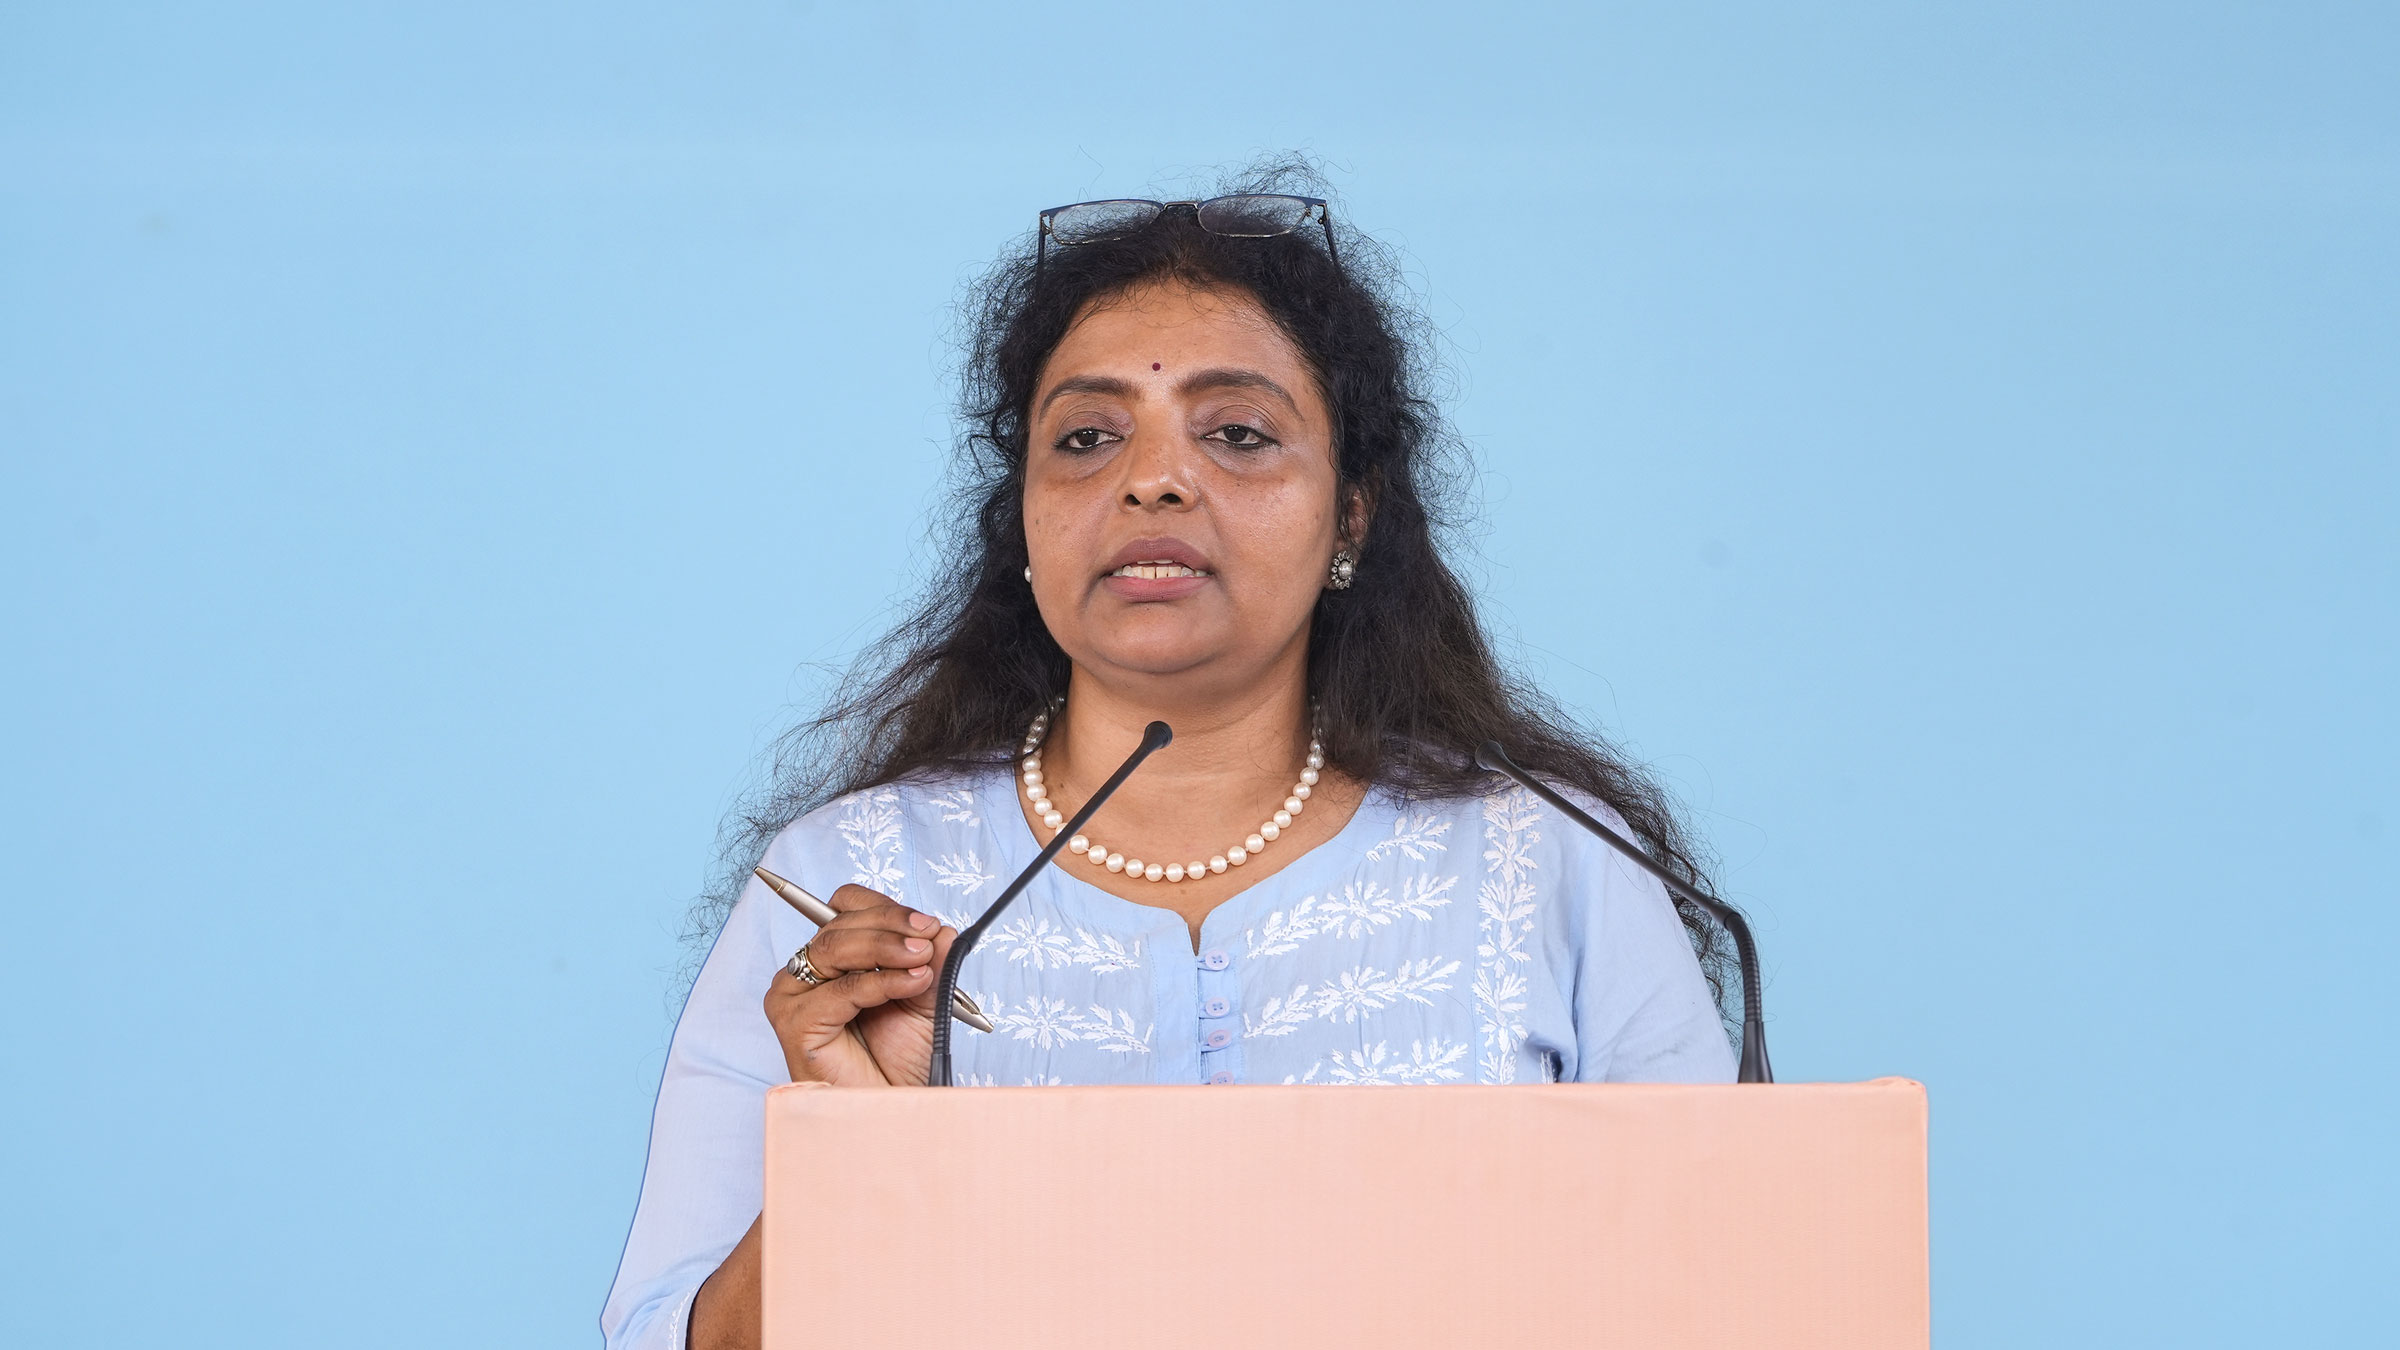 Adv. (Mrs) Siddha Vidya (High Court, Mumbai, Maharashtra) narrating what she experienced about the shortcomings in the present Cow Protection laws and the related difficulties